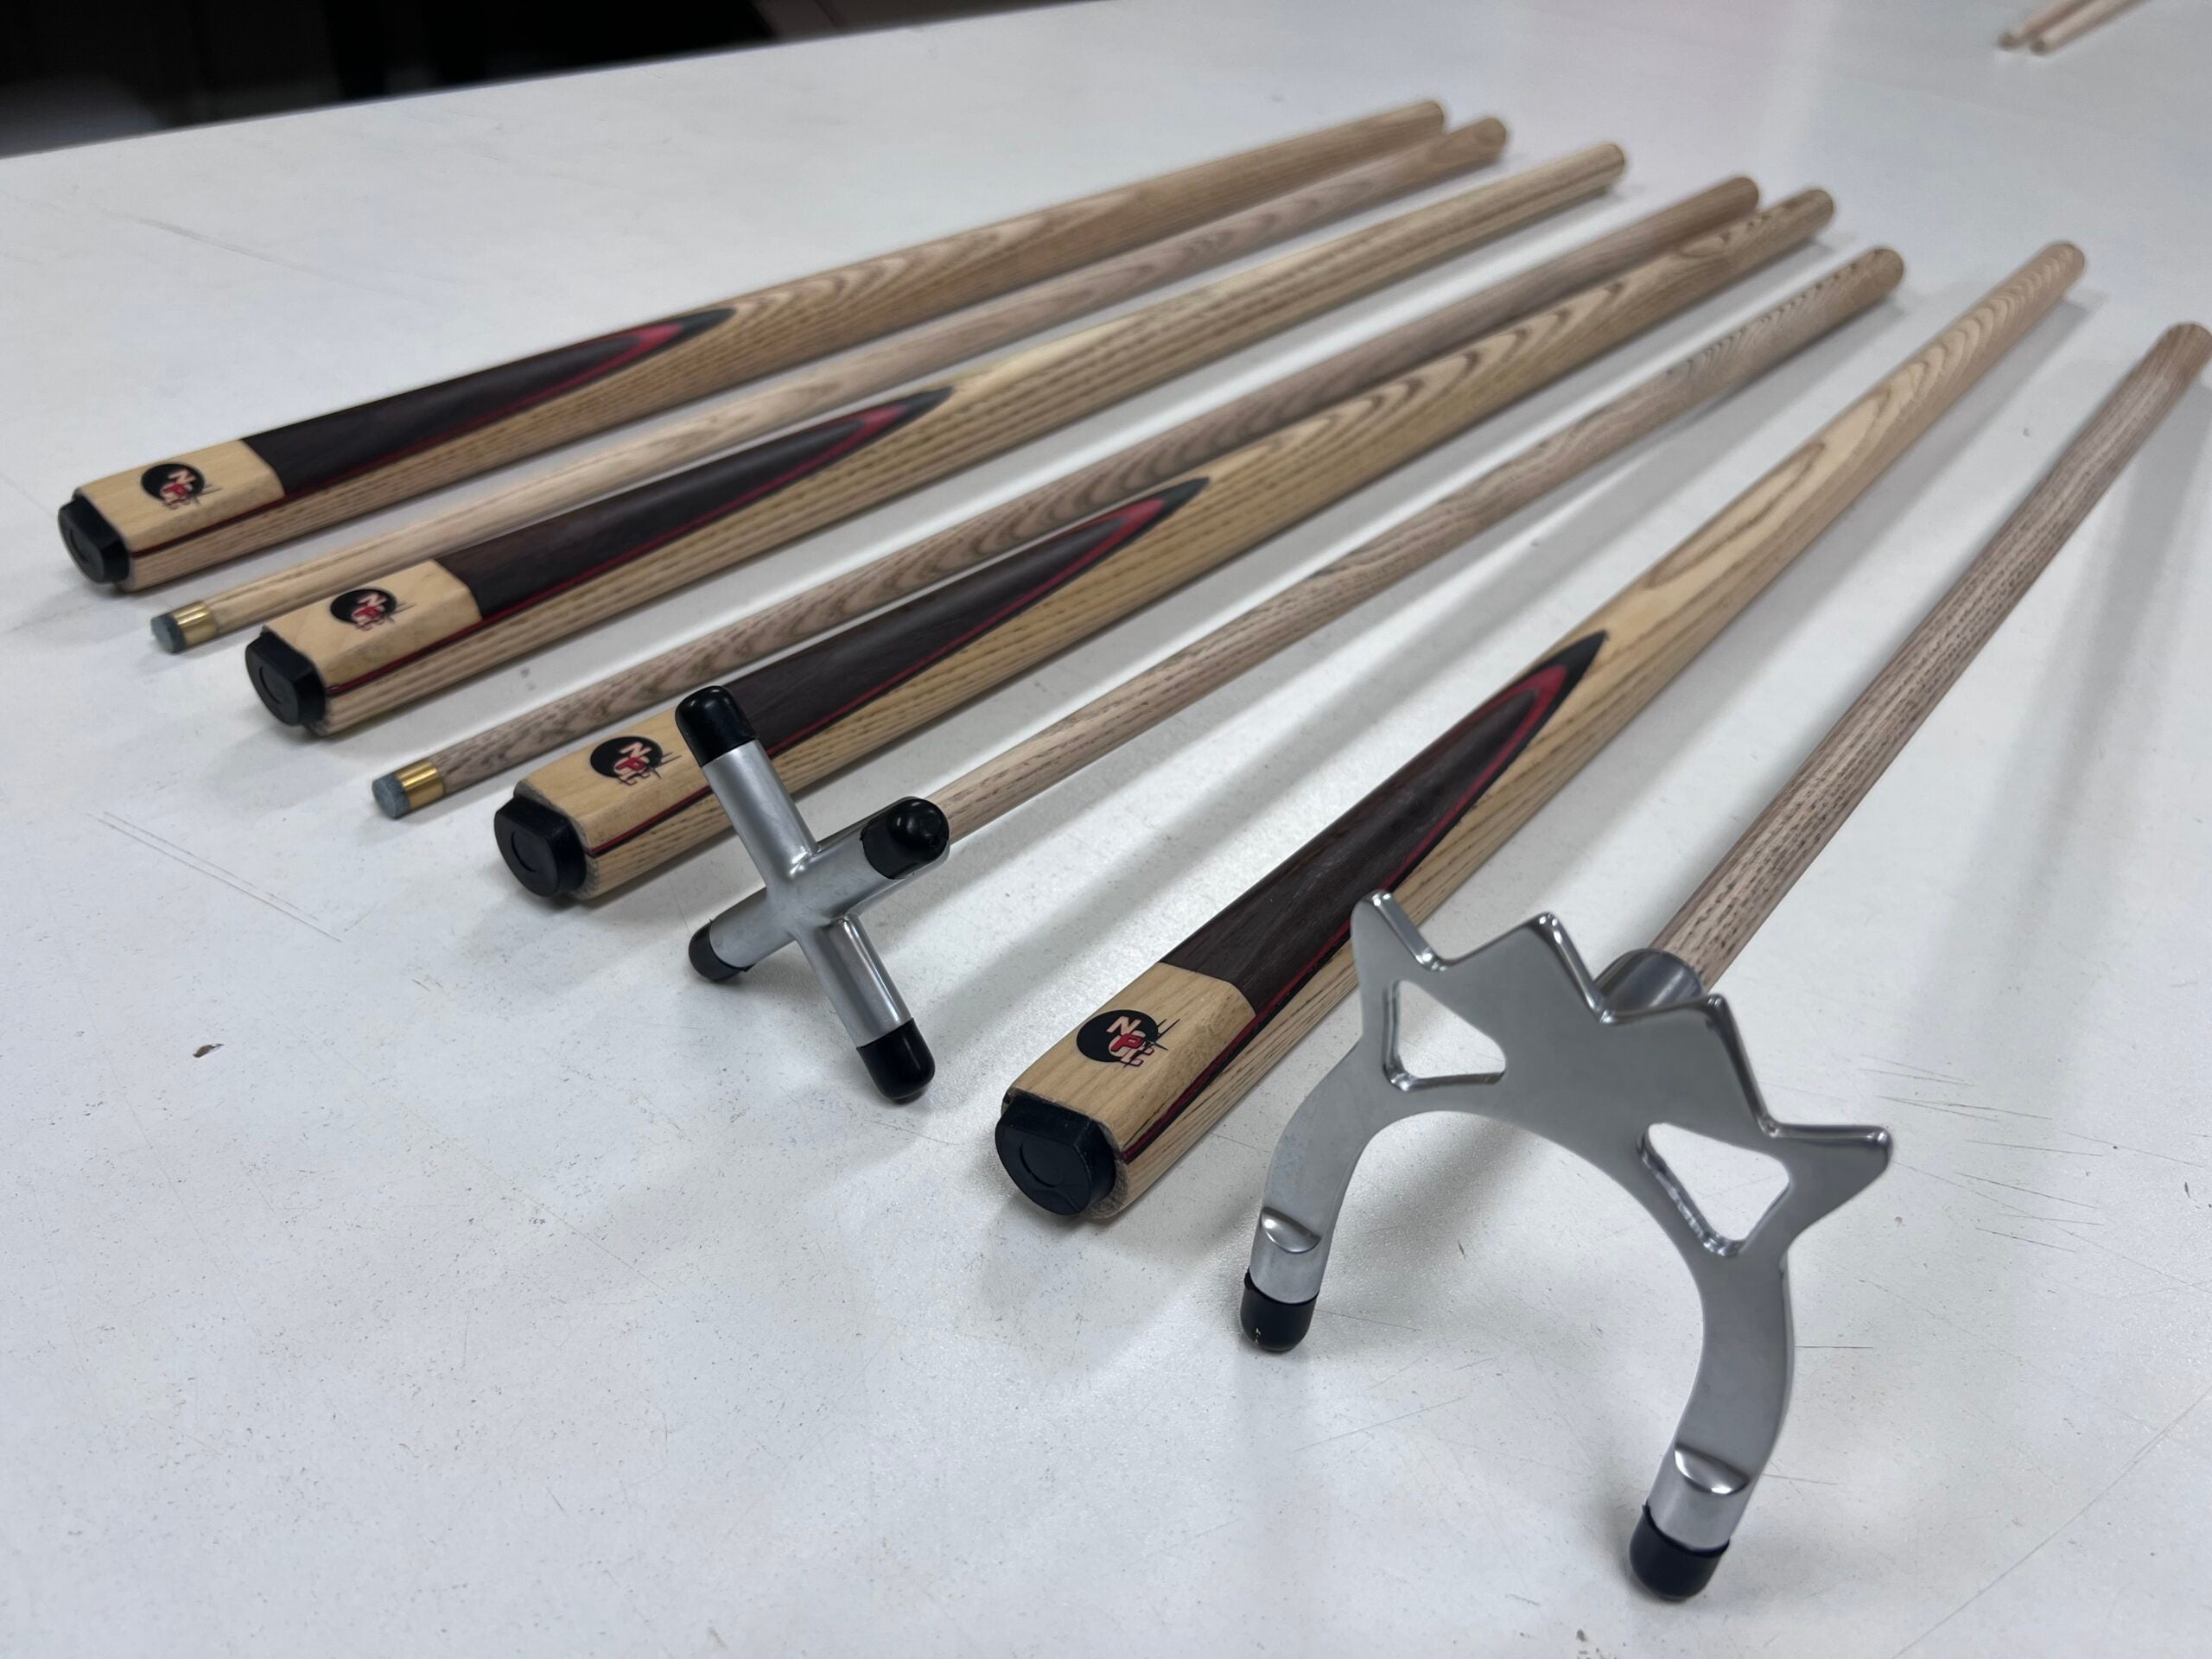 FULL ASH With Red Wood Flame Pool Cue REST Set 2 x cues, 1 x Satin Chrome Rest, 1 x Satin Chrome Spider